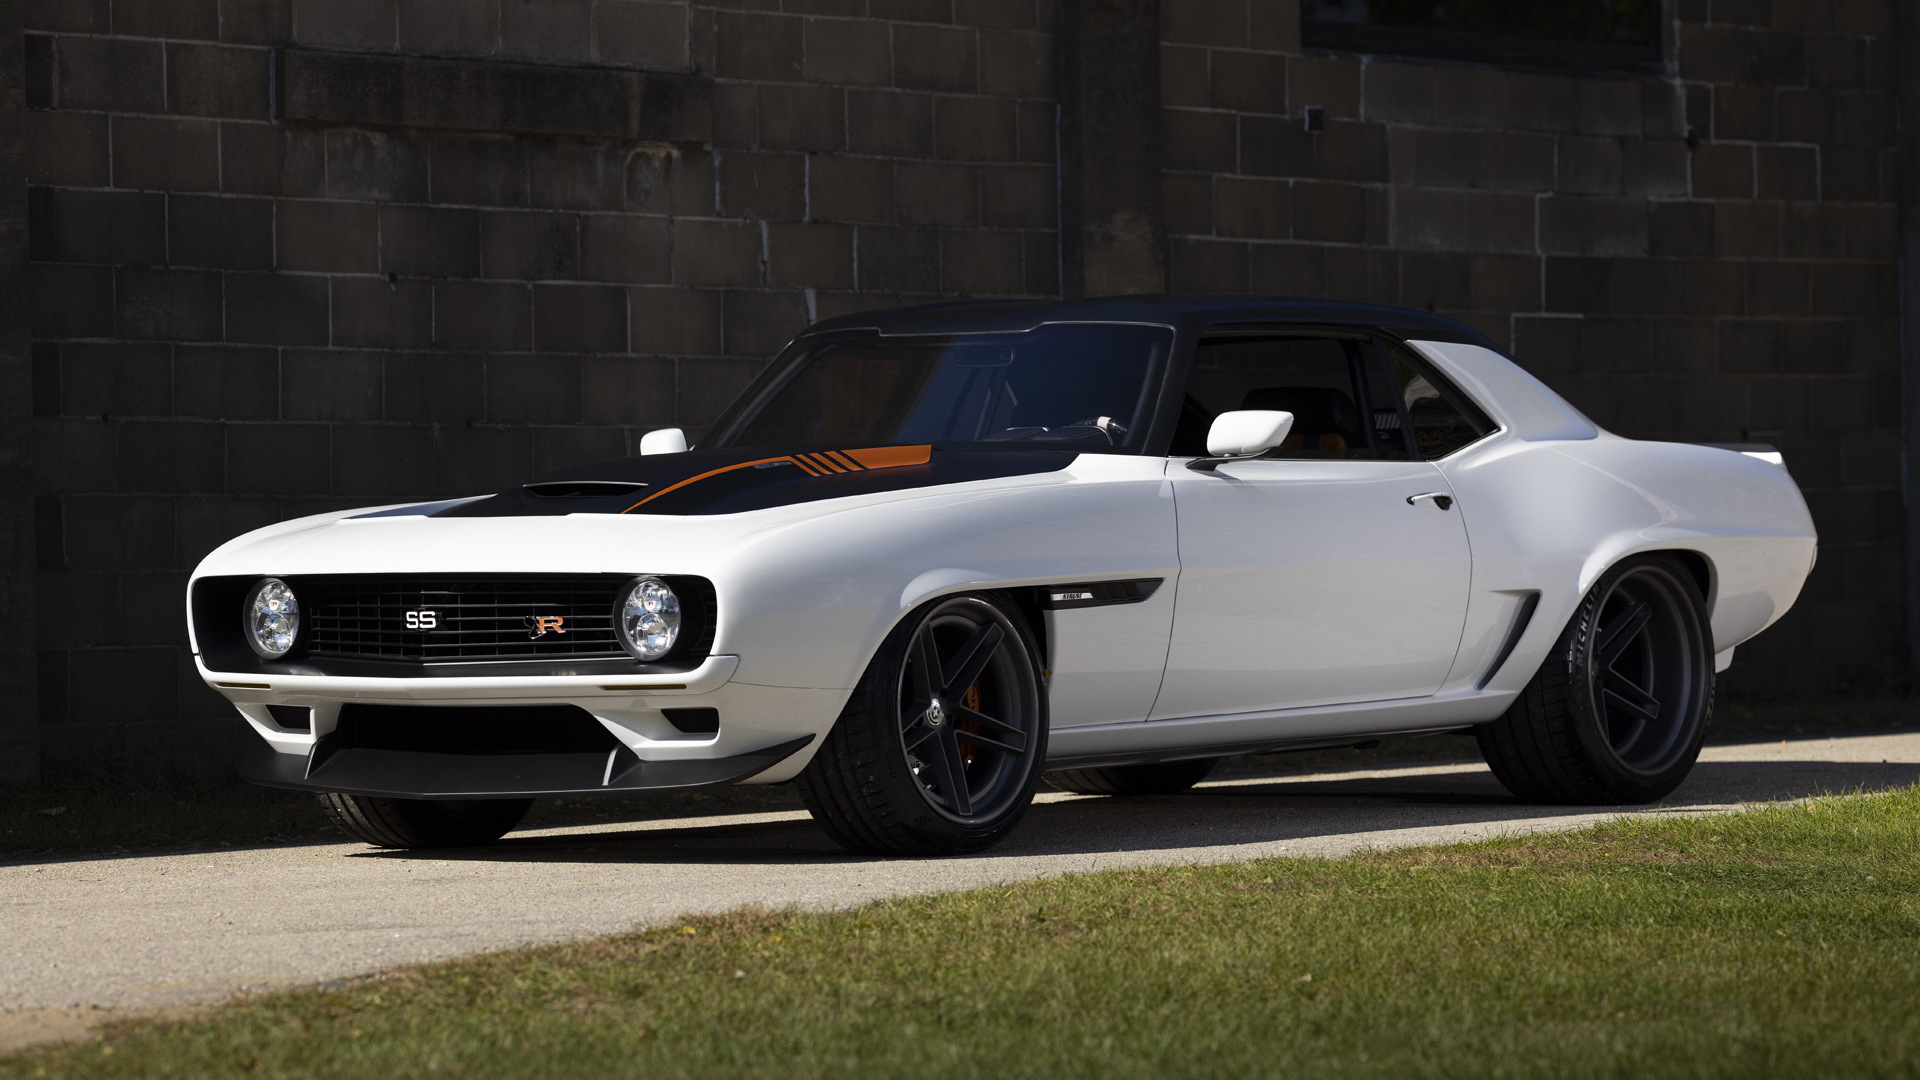 Ringbrothers Strode based on the 1969 Chevrolet Camaro